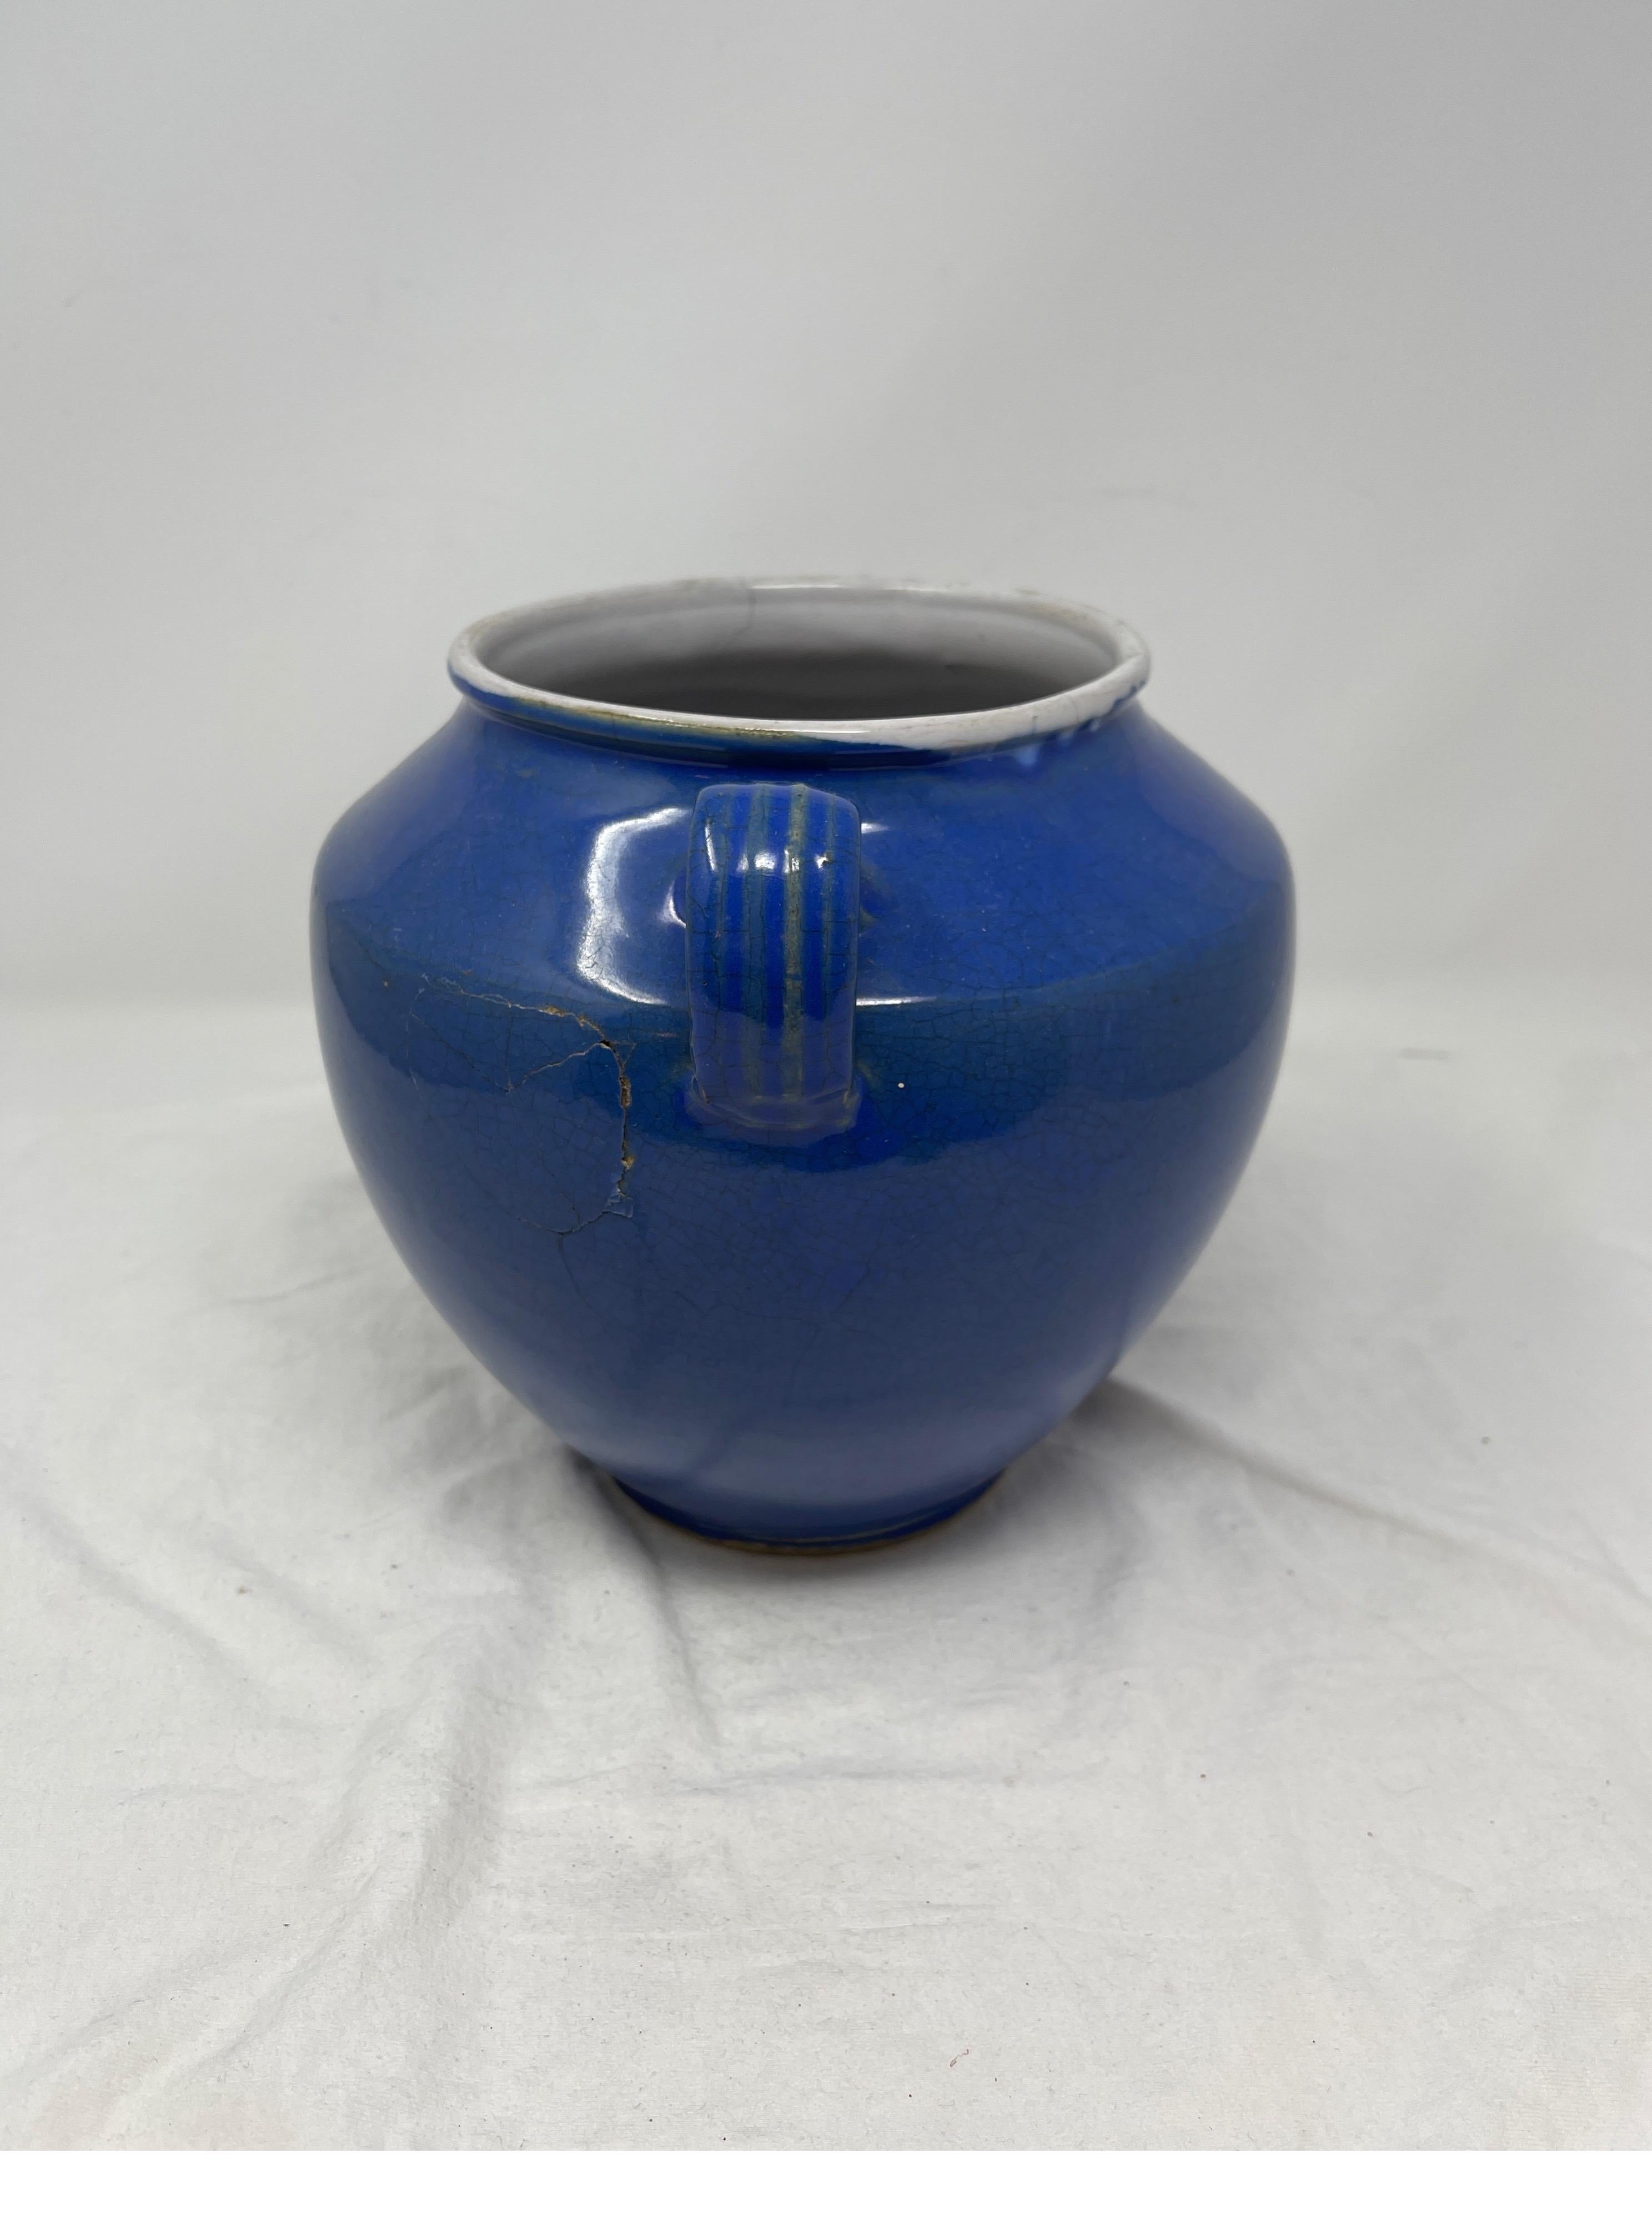 Found in the South of France, this antique French blue confit Pot is from the 19th century. Covered in a blue glaze, pots like this were a staple in every French kitchen for preserving. From the South West of France, it has two small handles on each